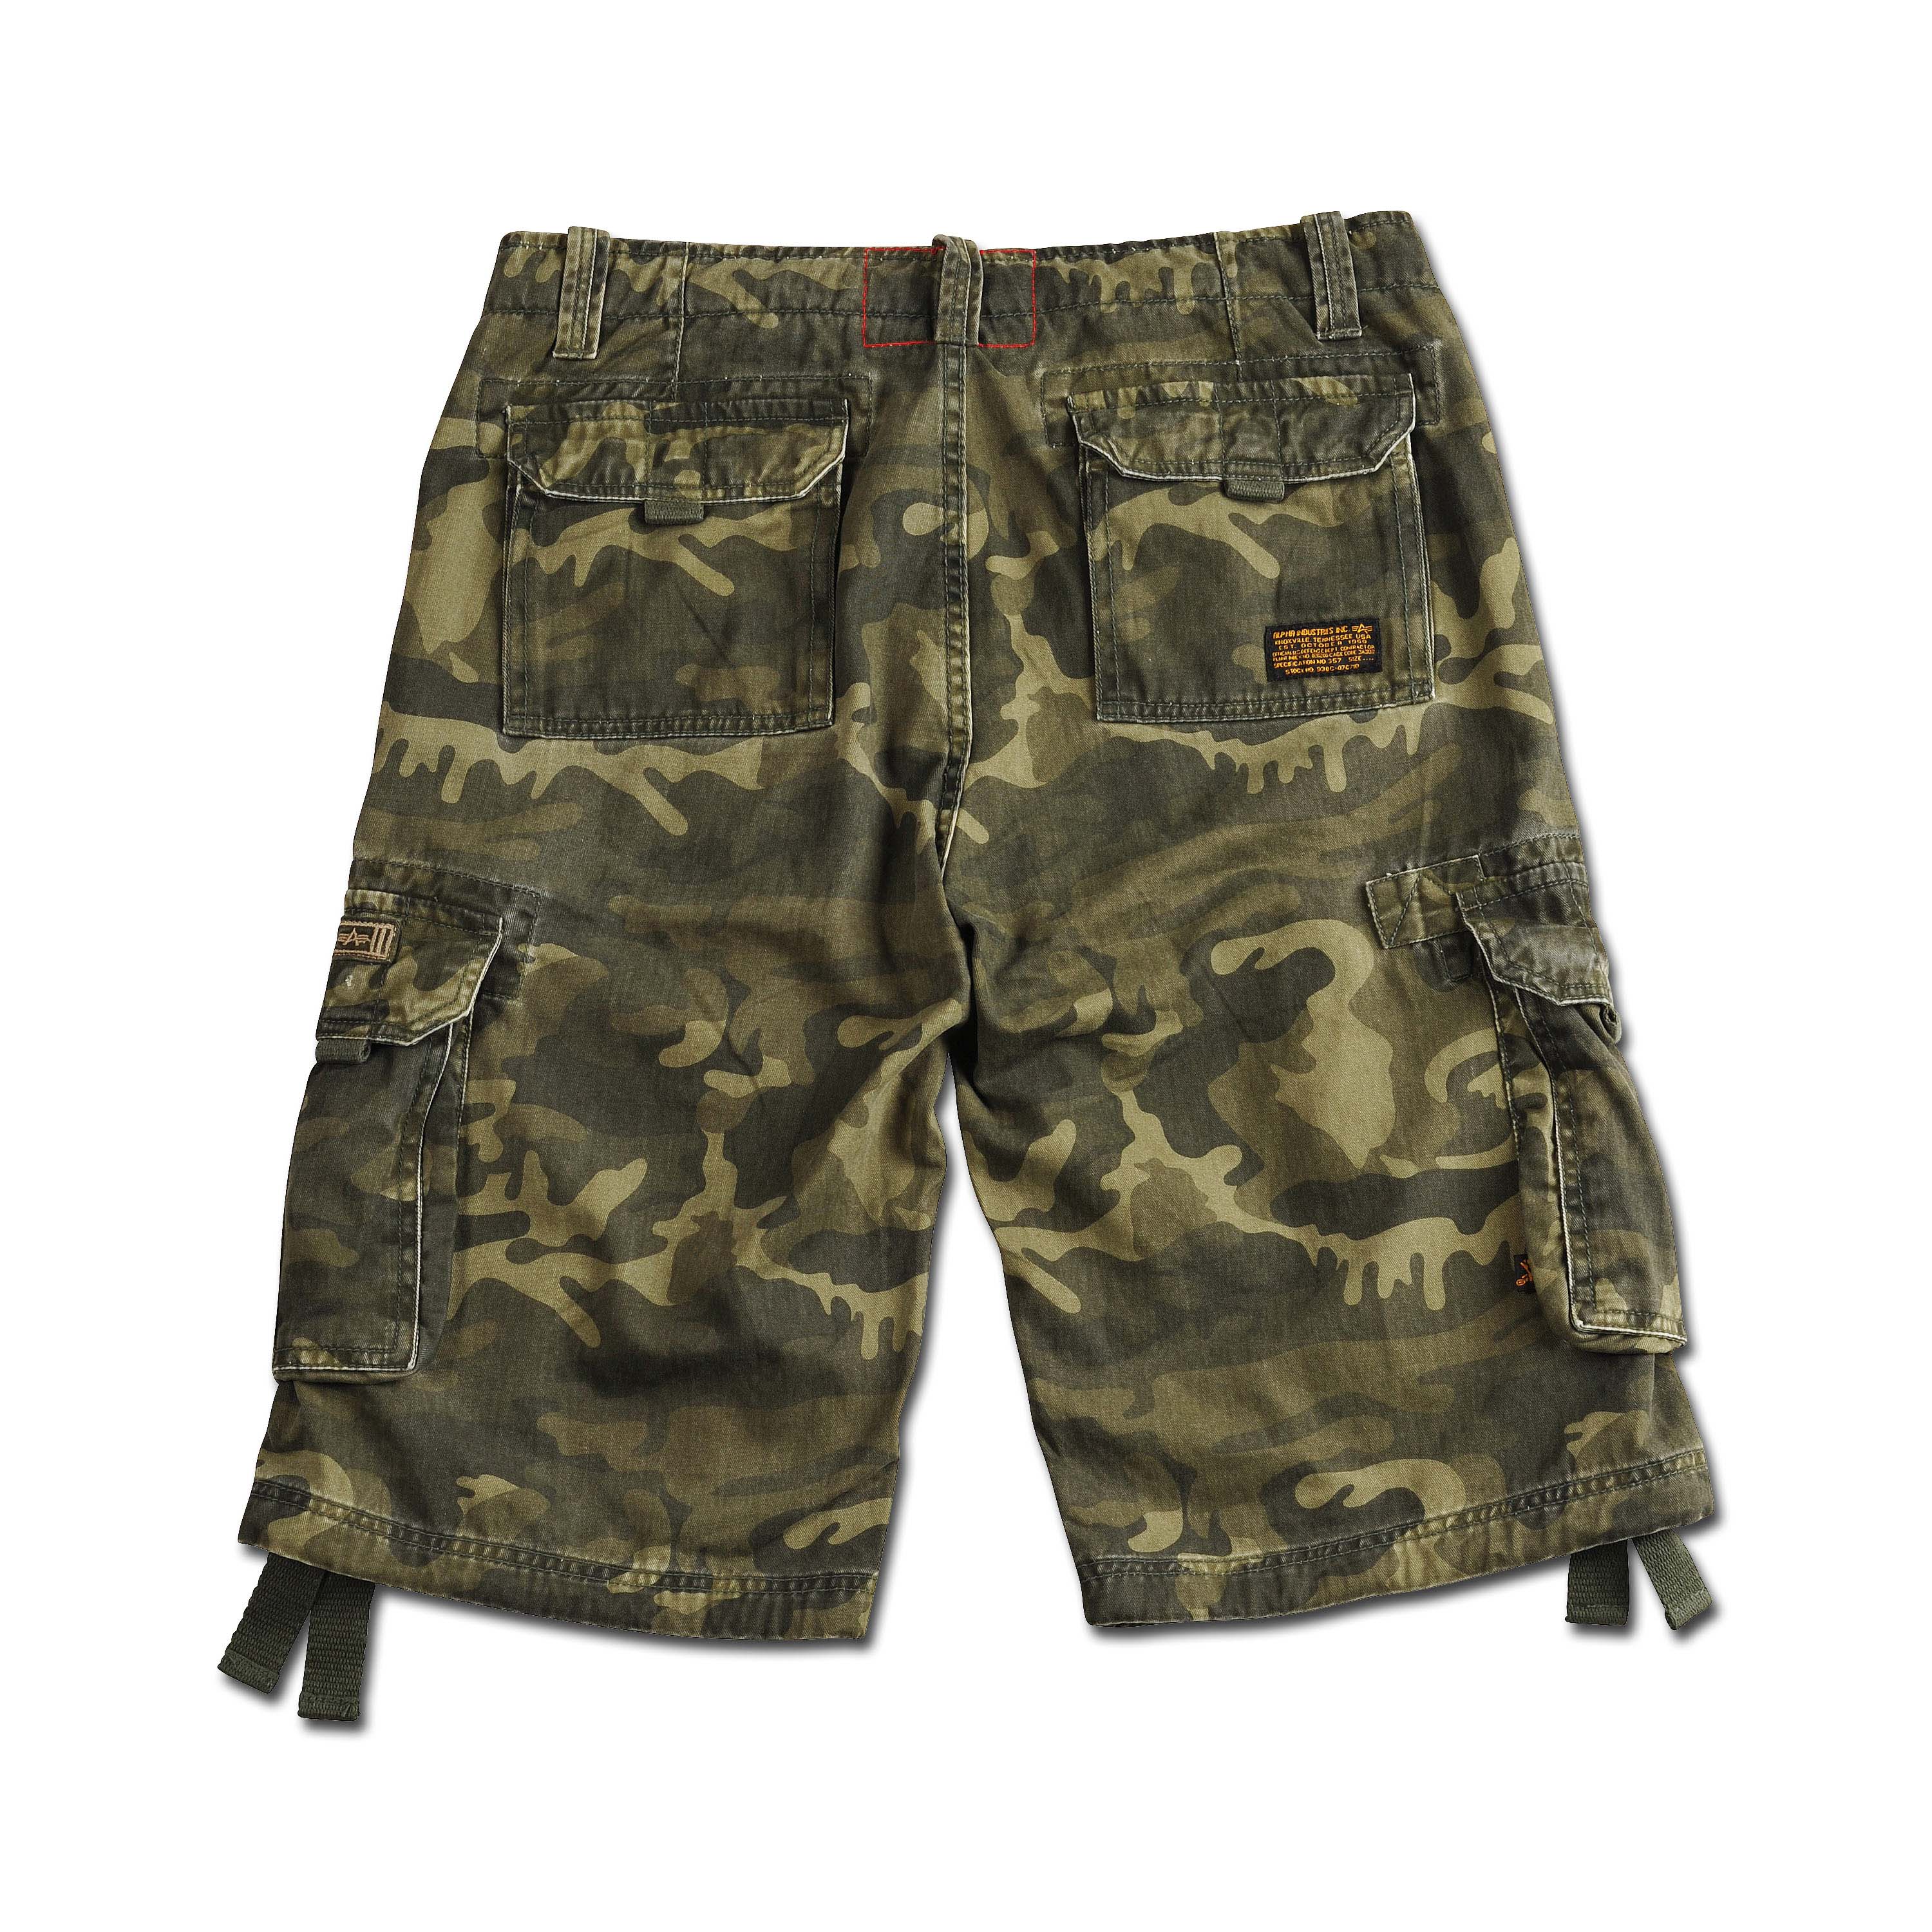 Purchase the Alpha Industries Jet Shorts olive camo by ASMC